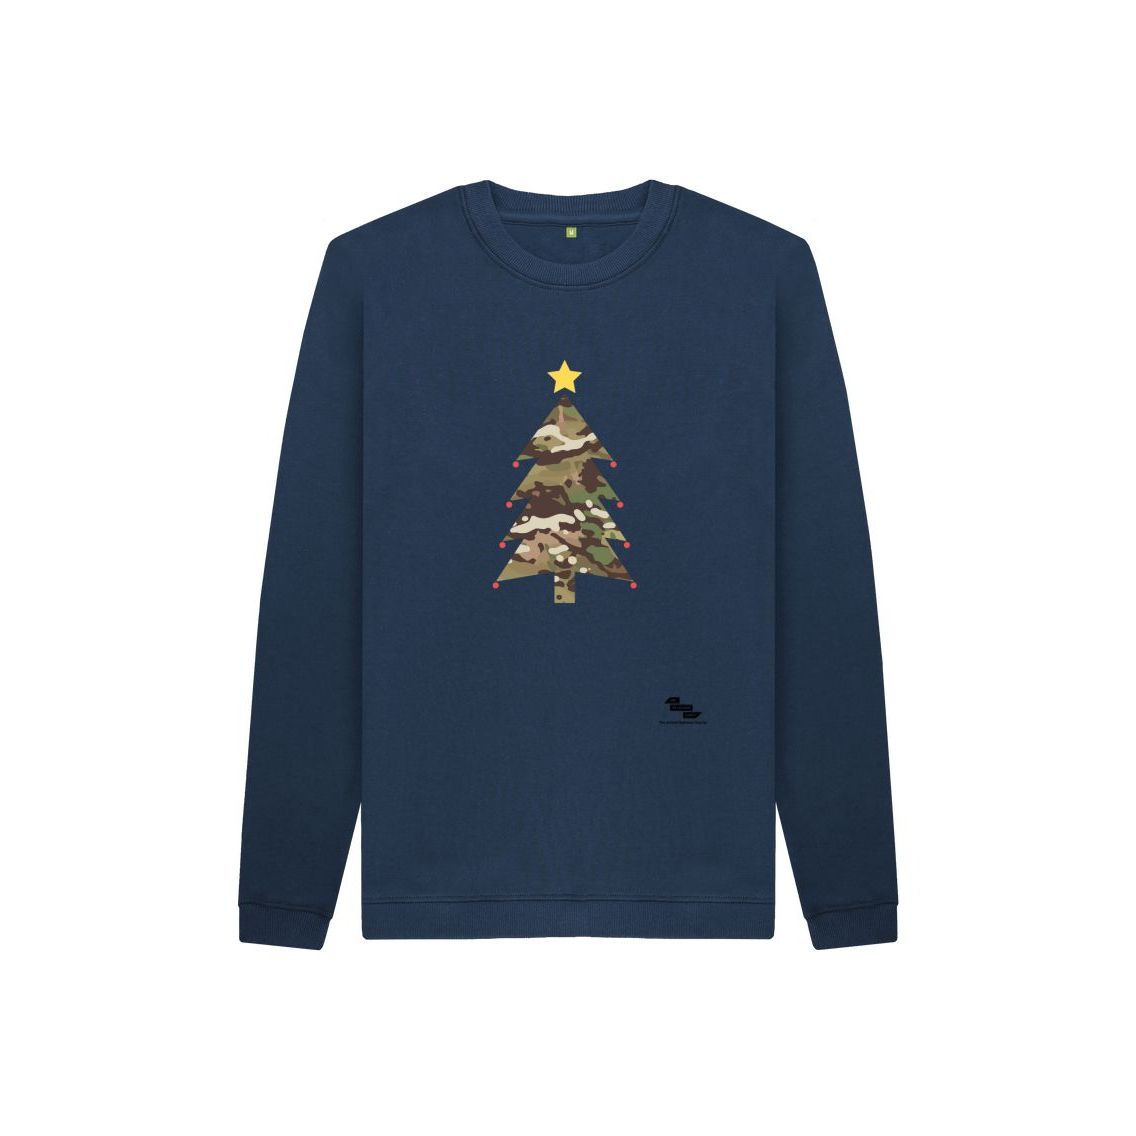 Kids camouflage Christmas jumper - ABF The Soldiers' Charity Shop